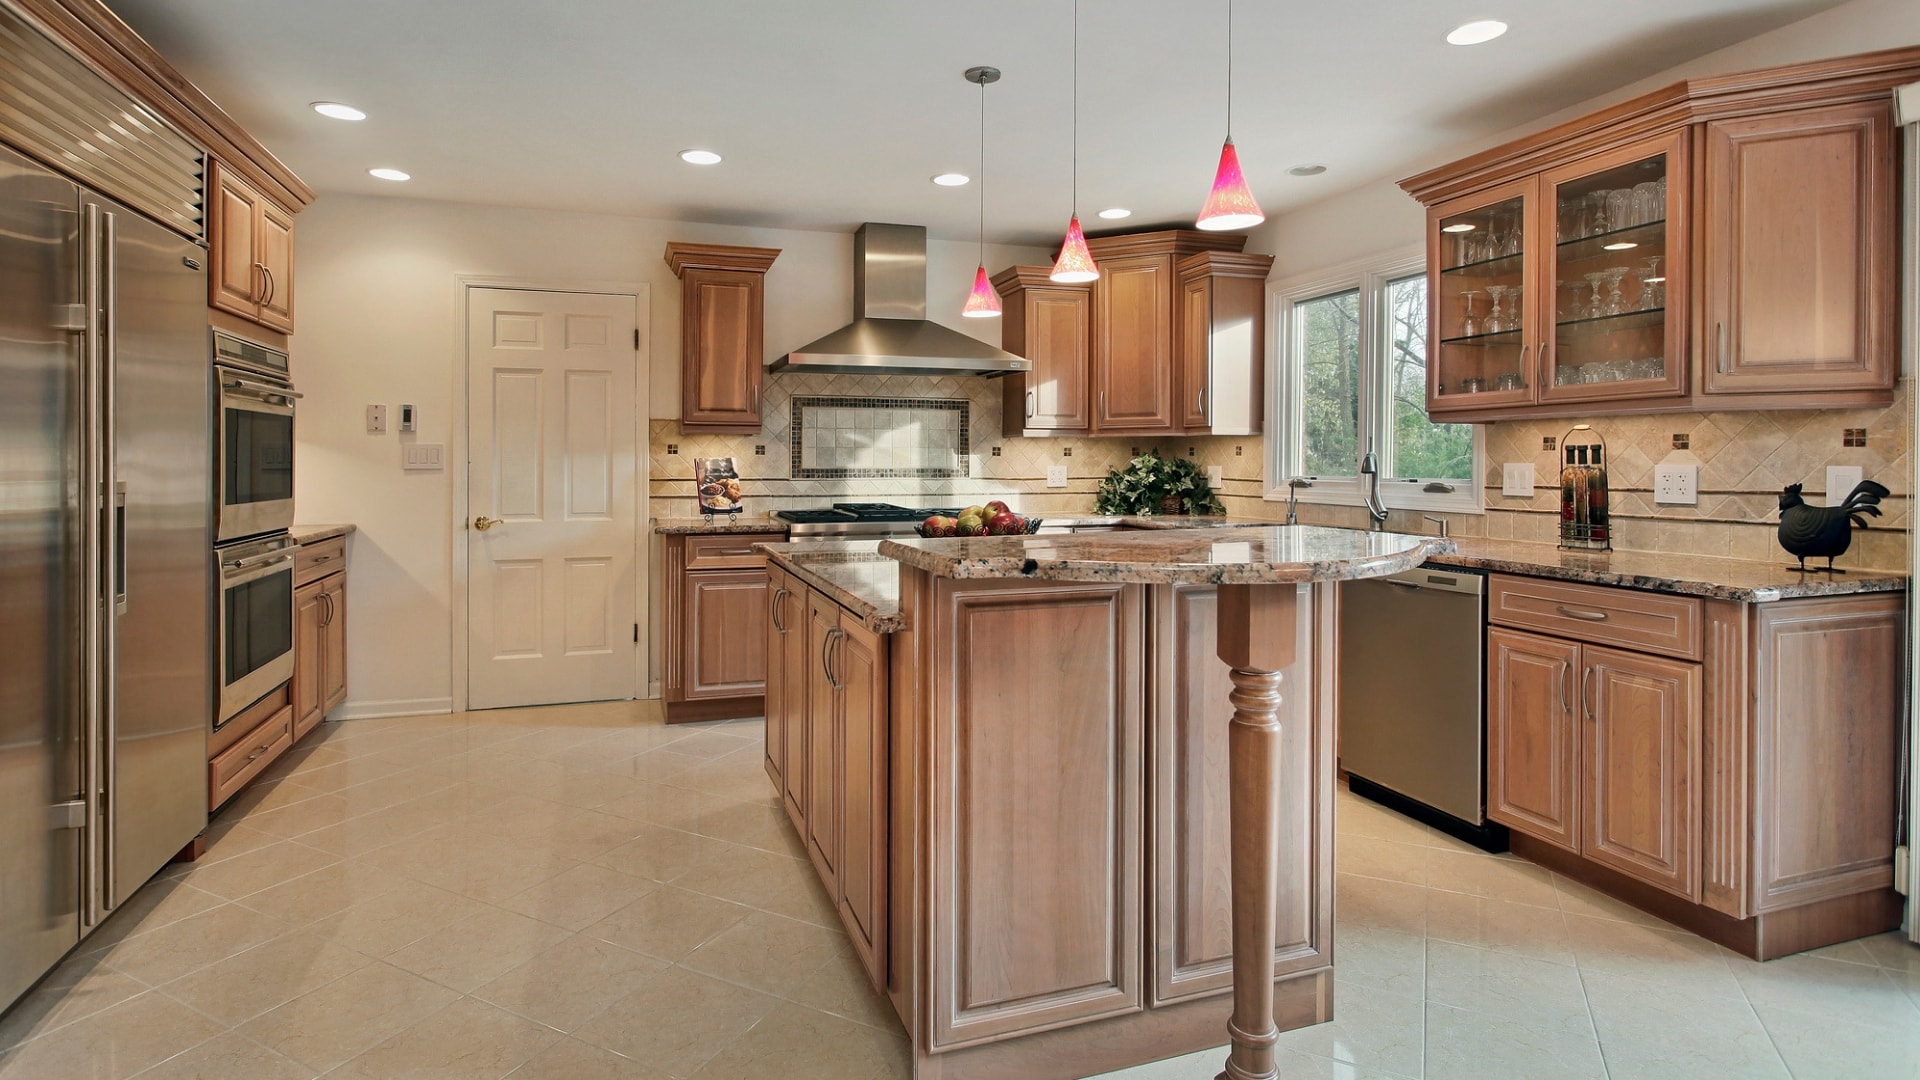 Average Cost Of A Kitchen Remodel 